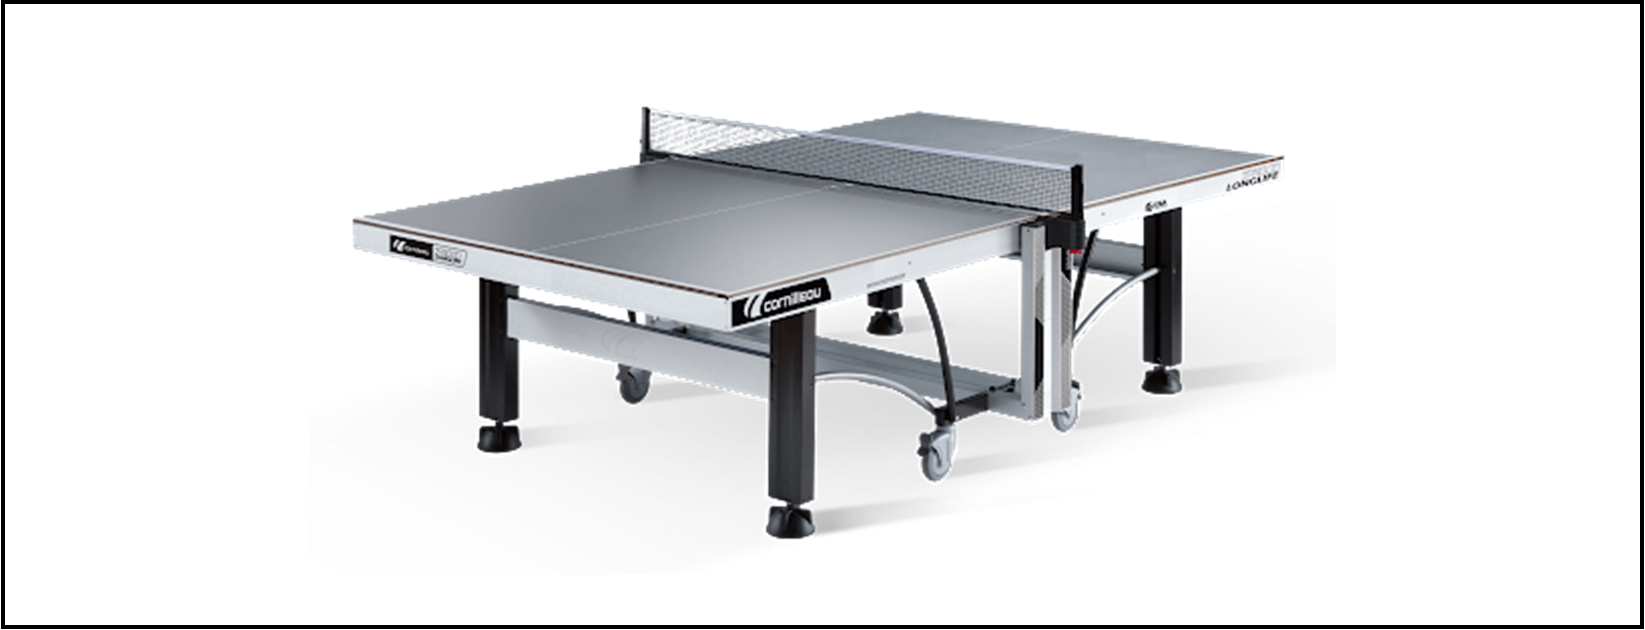 Ping Pong Online Store, High-Performance